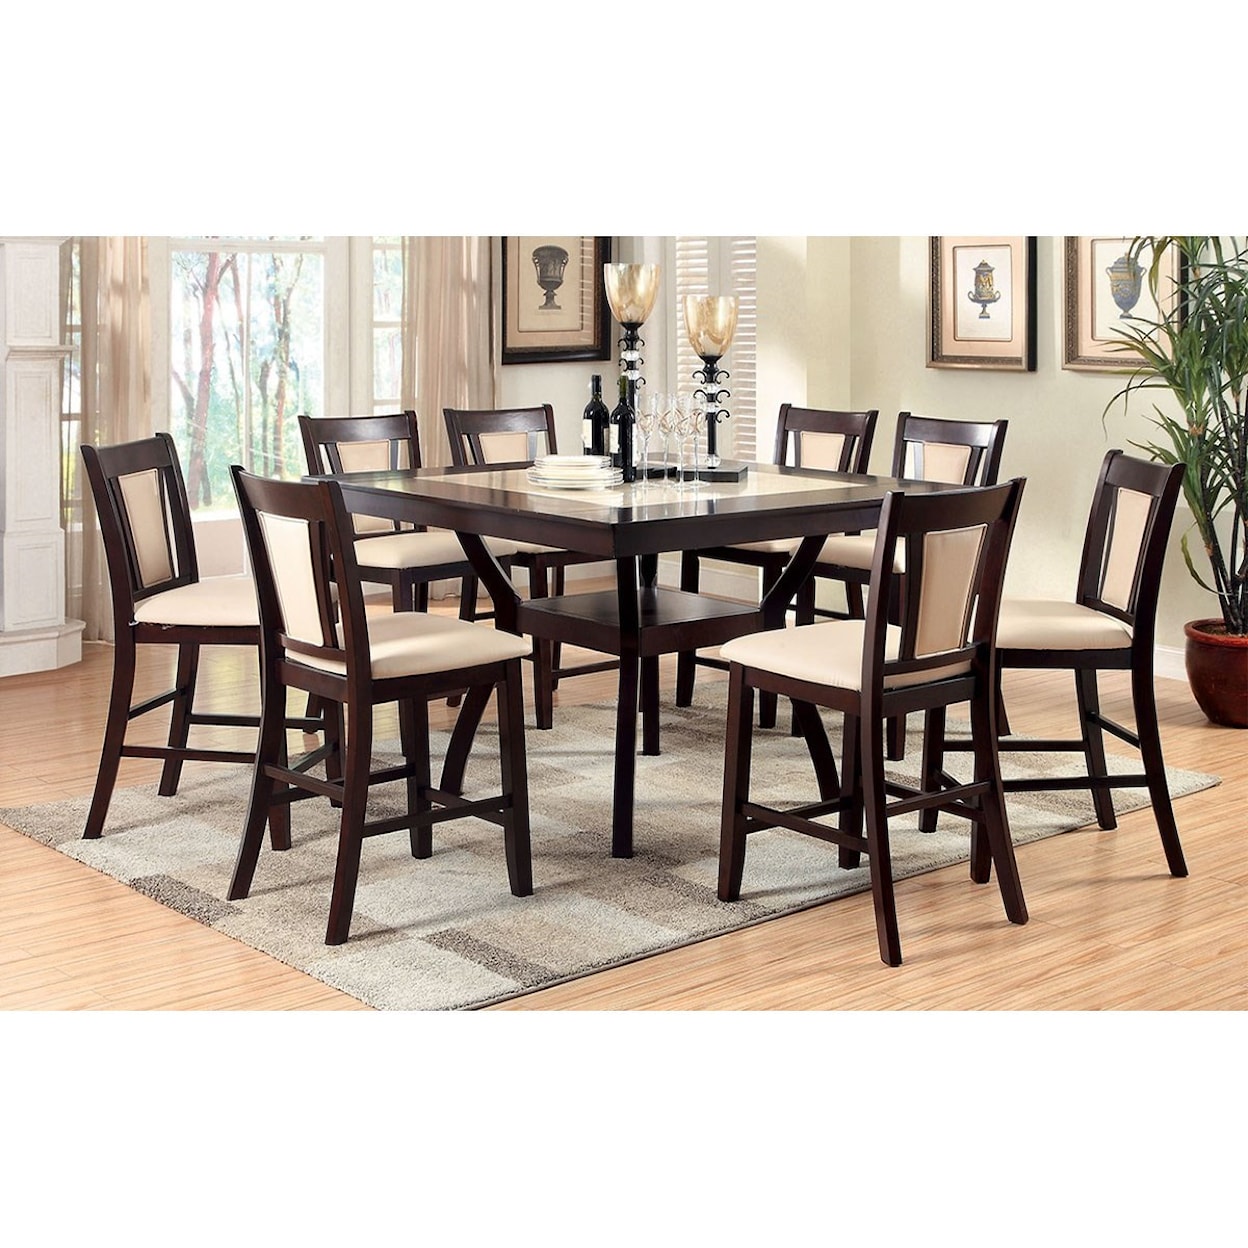 FUSA Brent 9 Pc Counter Height Dining Set